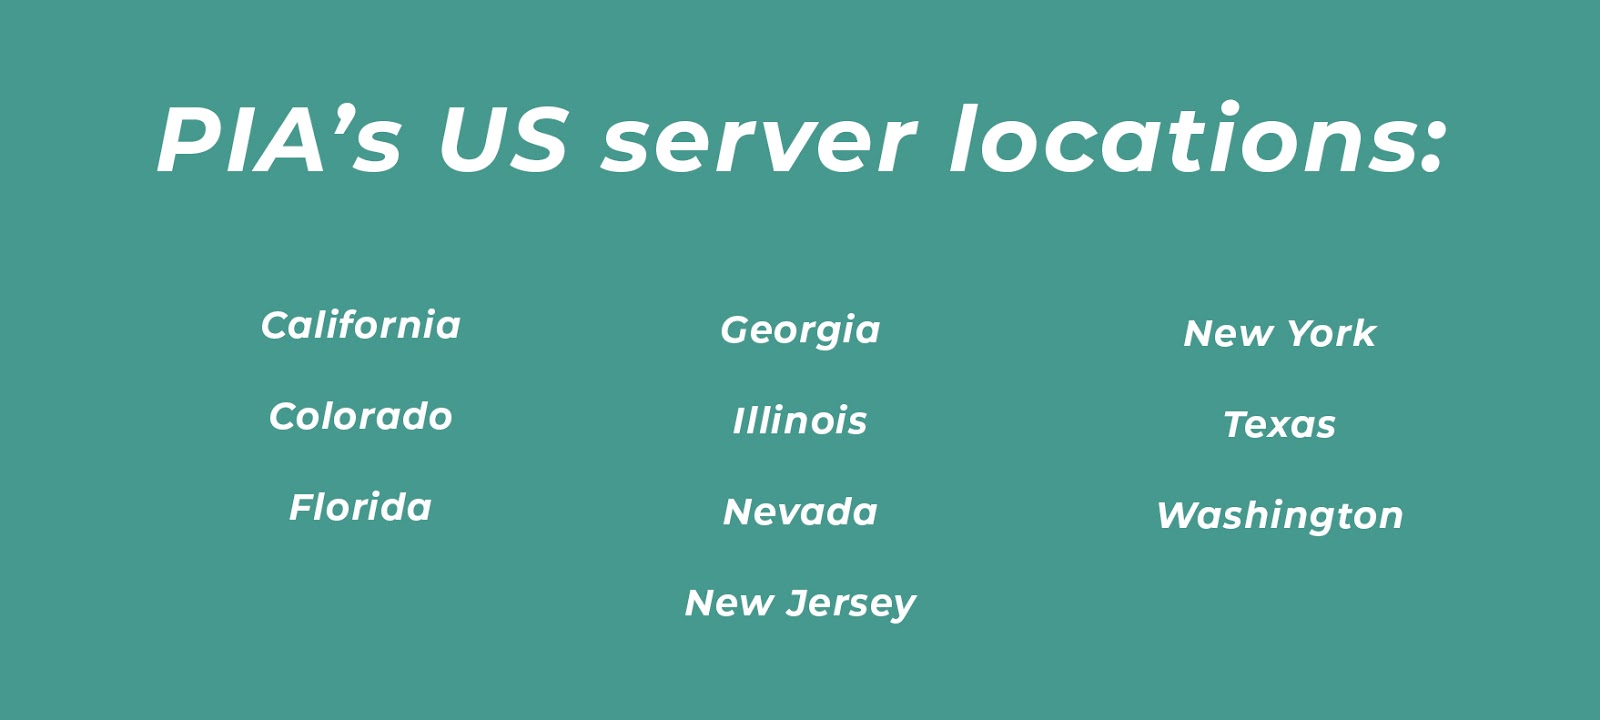 PIA server locations list in US